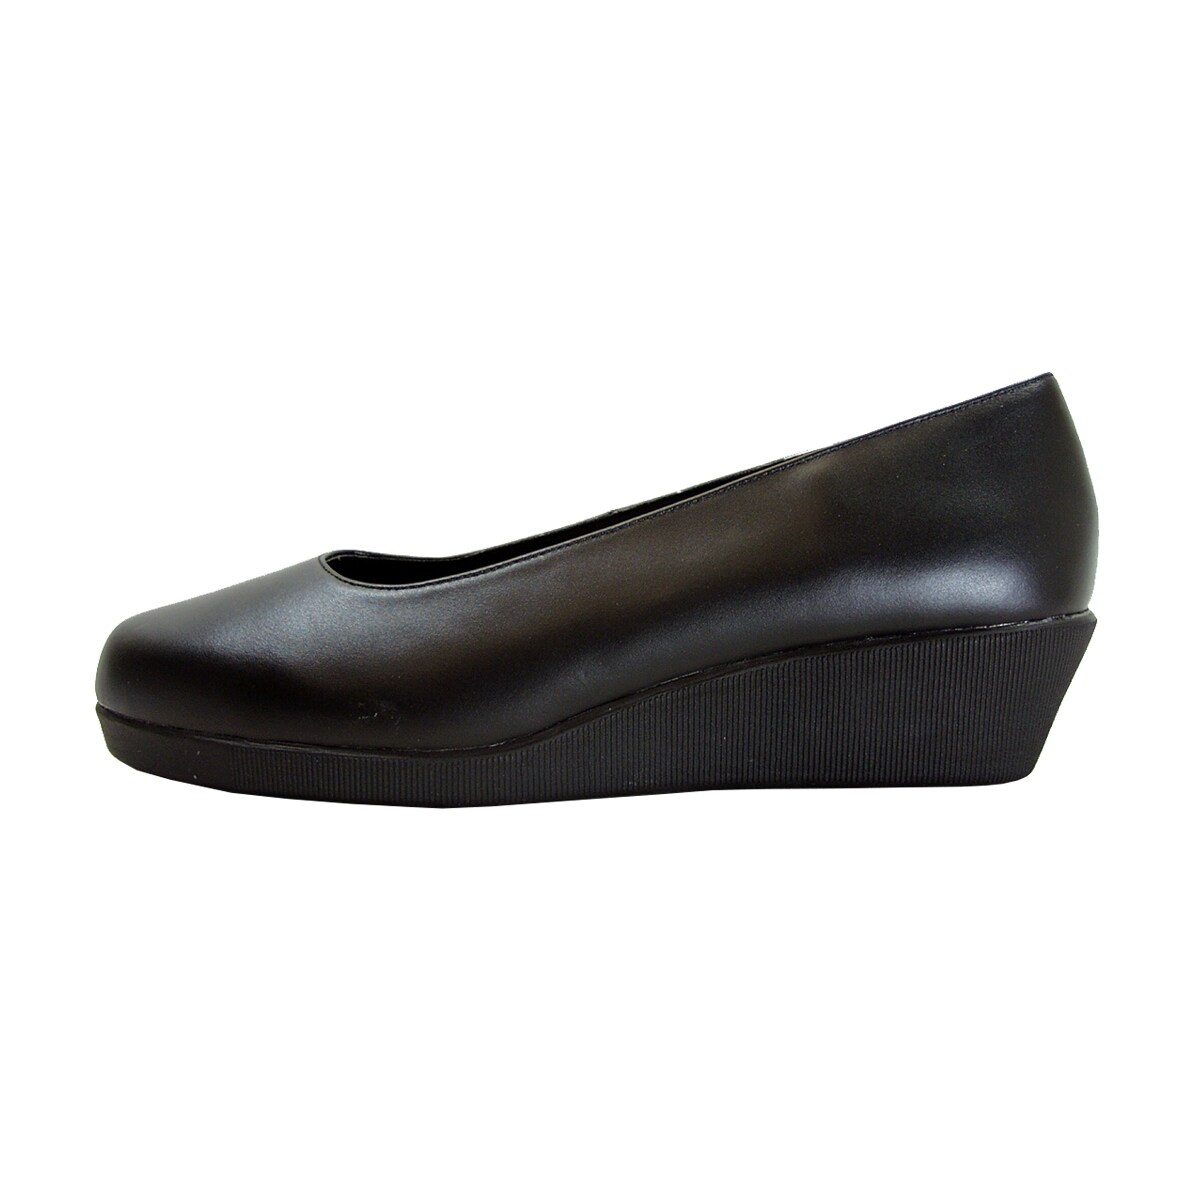 women's wide wedge shoes